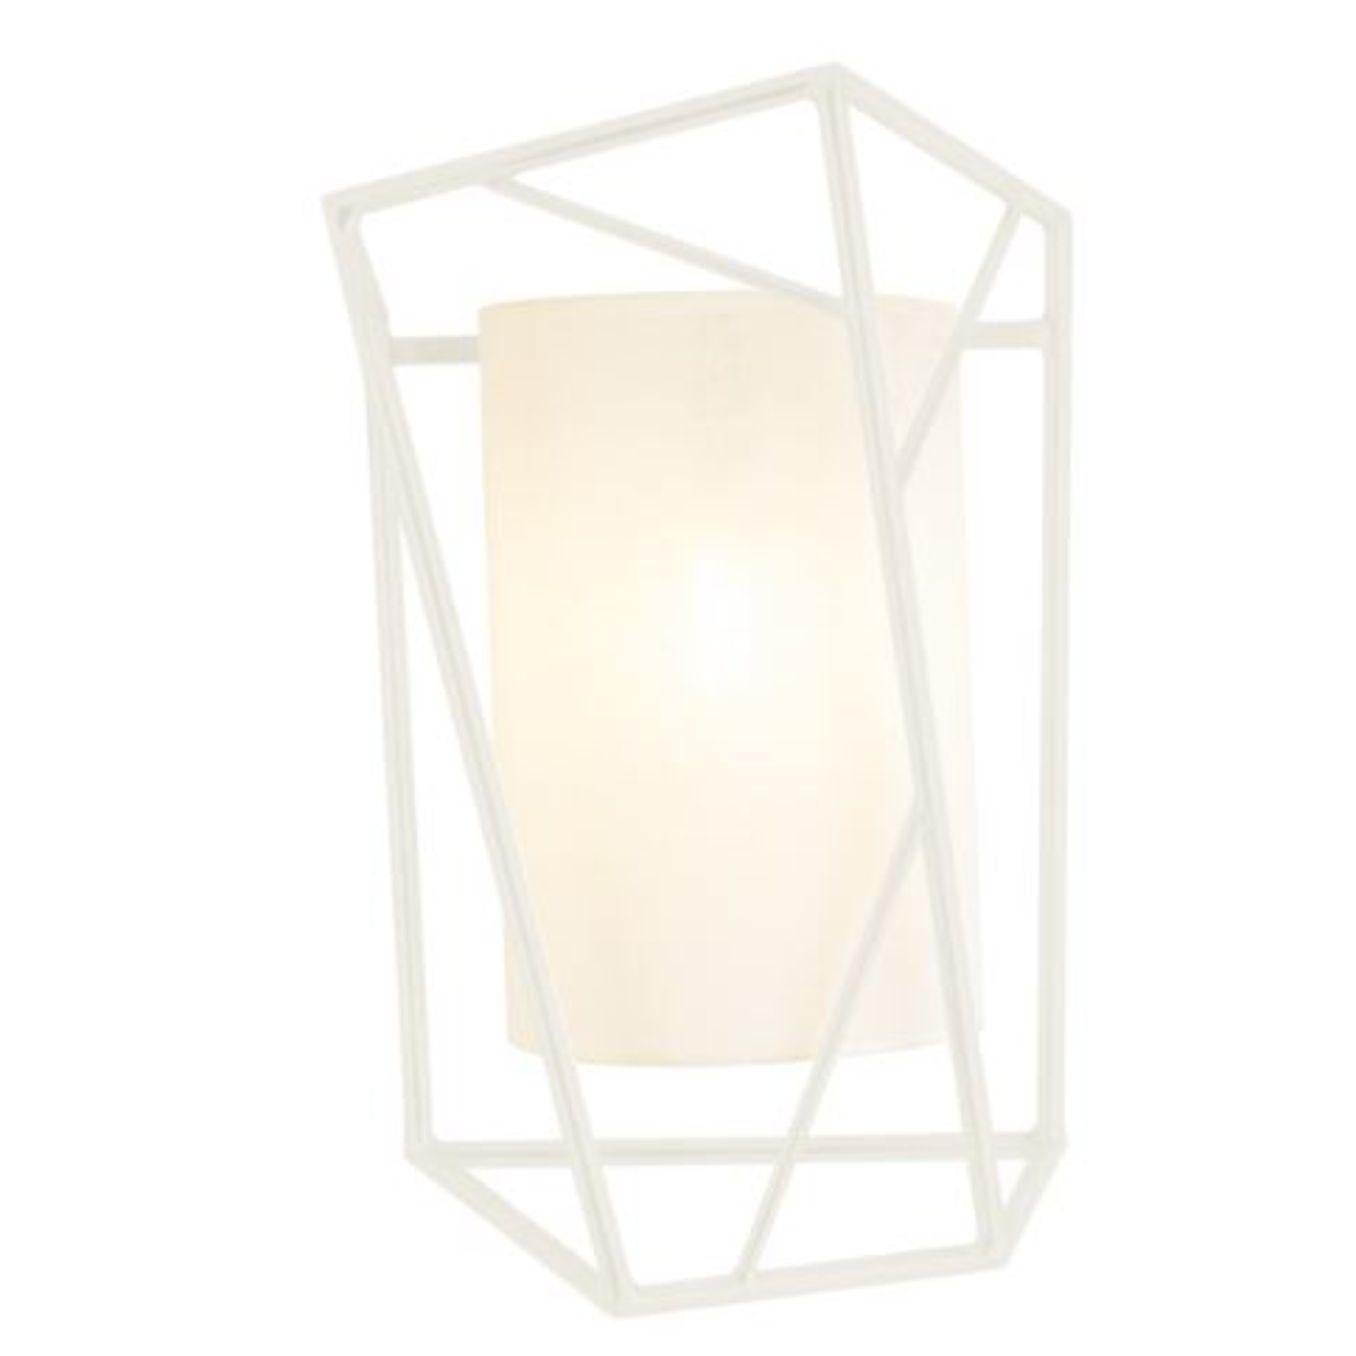 Ivory Star wall lamp by Dooq
Dimensions: W 28 x D 20 x H 51 cm
Materials: lacquered metal, polished or satin metal.
abat-jour: linen
Also available in different colors and materials.

Information:
230V/50Hz
E14/1x15W LED
120V/60Hz
E12/1x10W LED
bulb